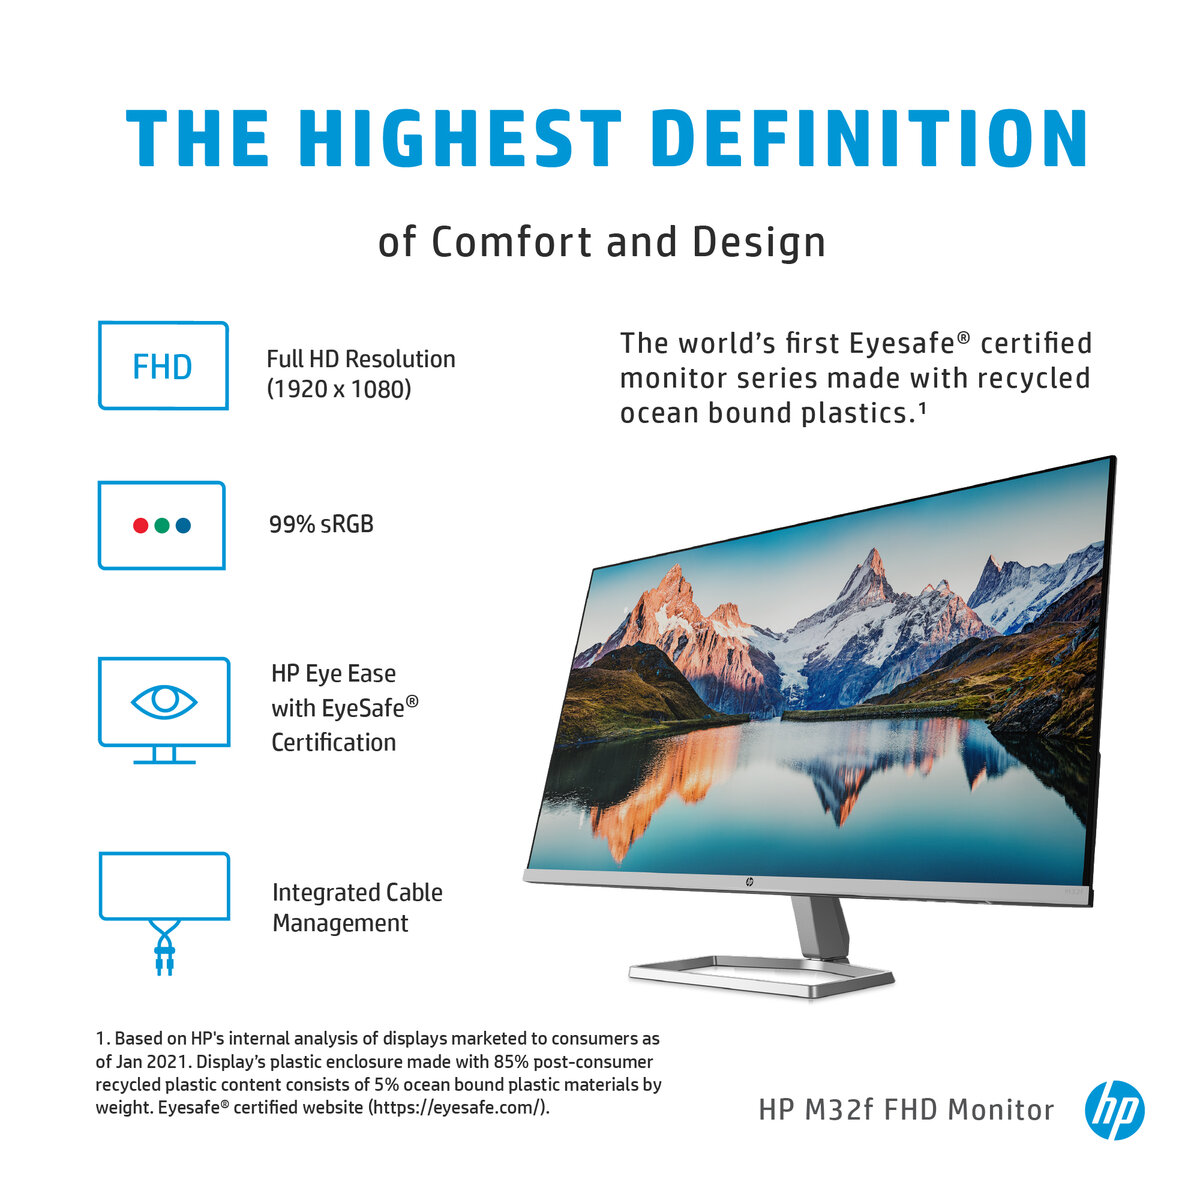 slide 8 of 11, zoom in, hp m32f fhd monitor